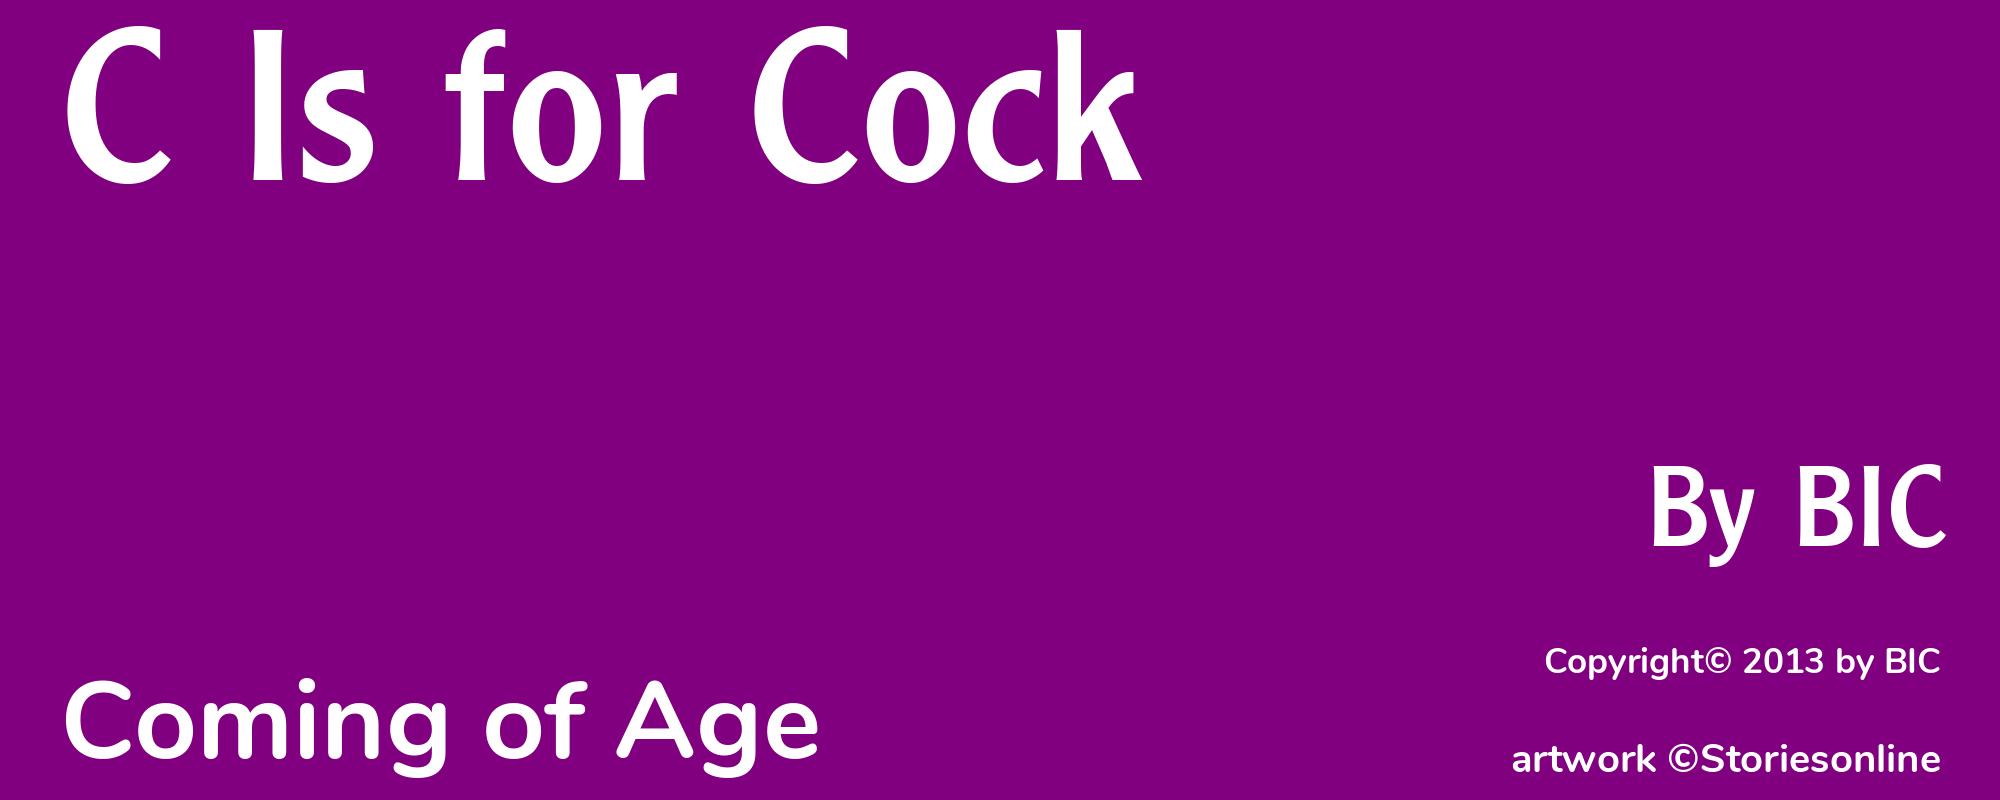 C Is for Cock - Cover